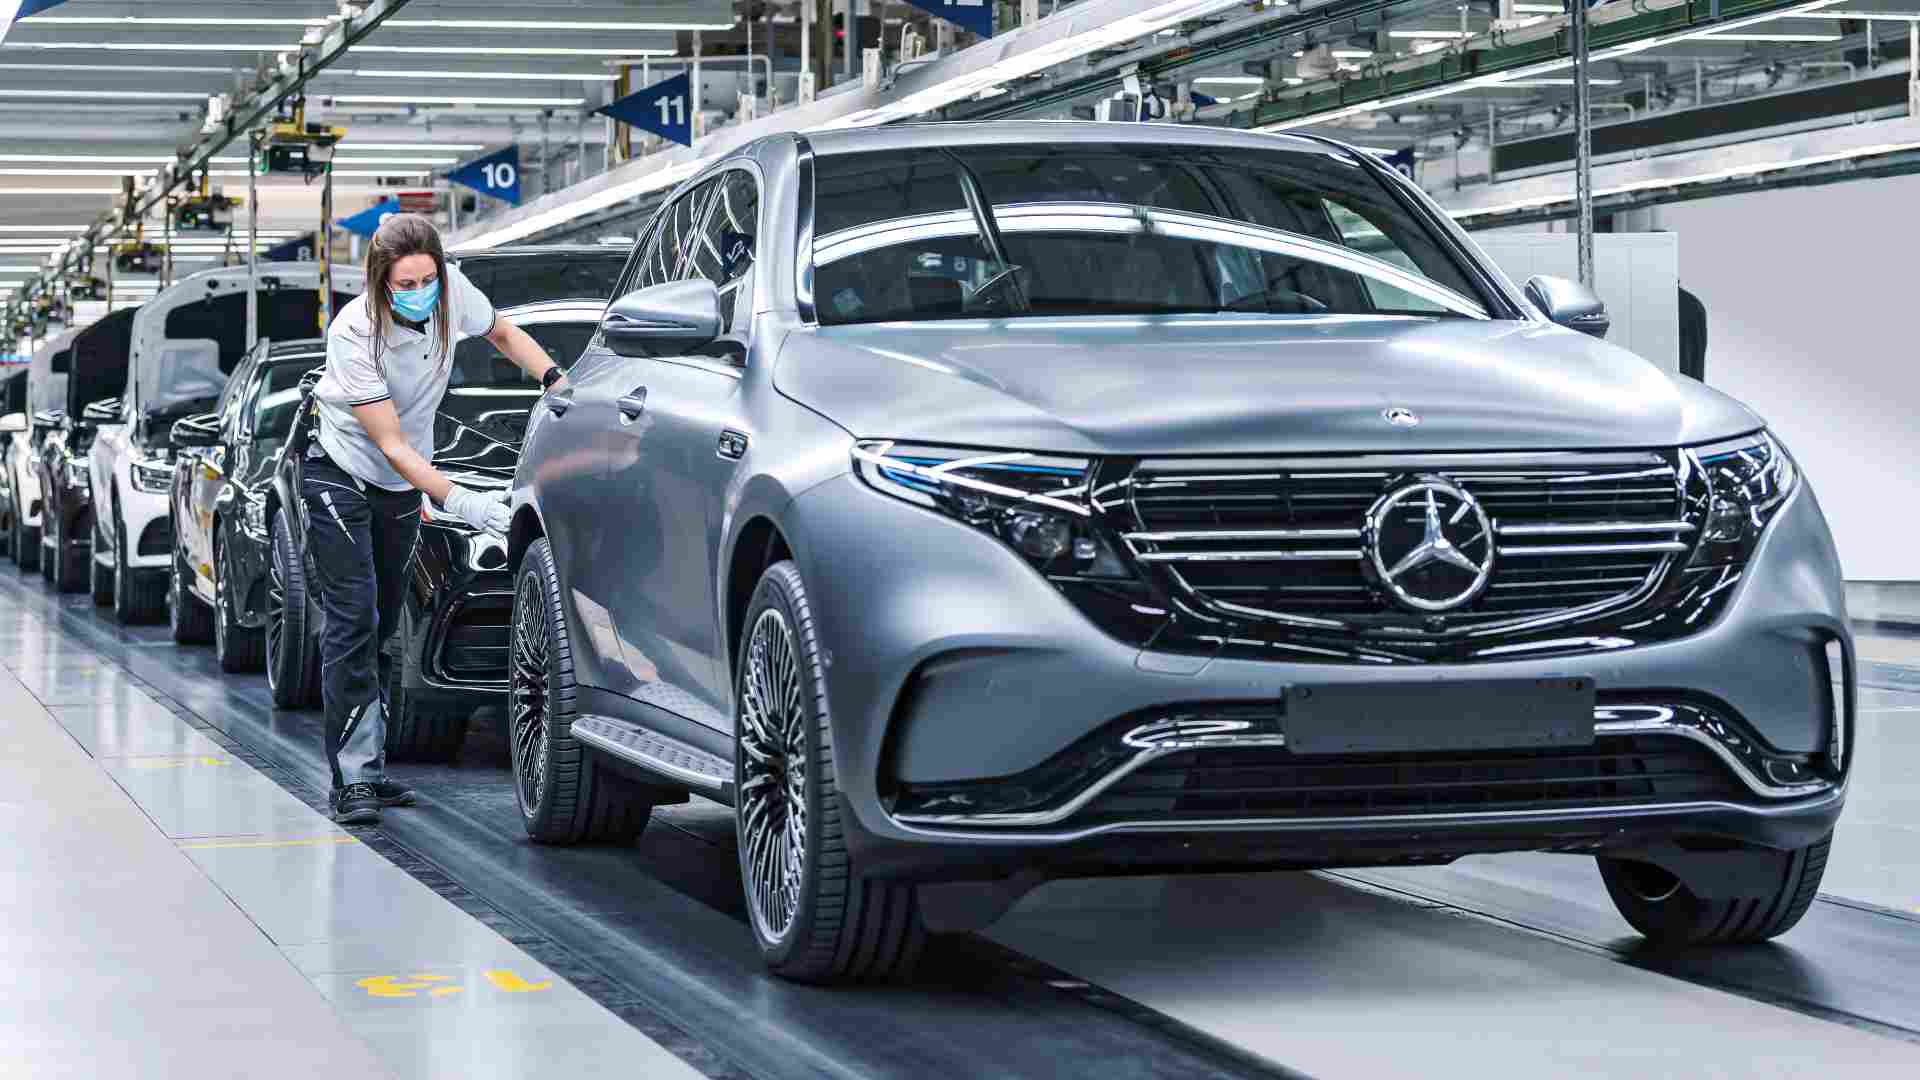 Mercedes Benz India Plans to launch 4 New Electric Cars in India by 2024